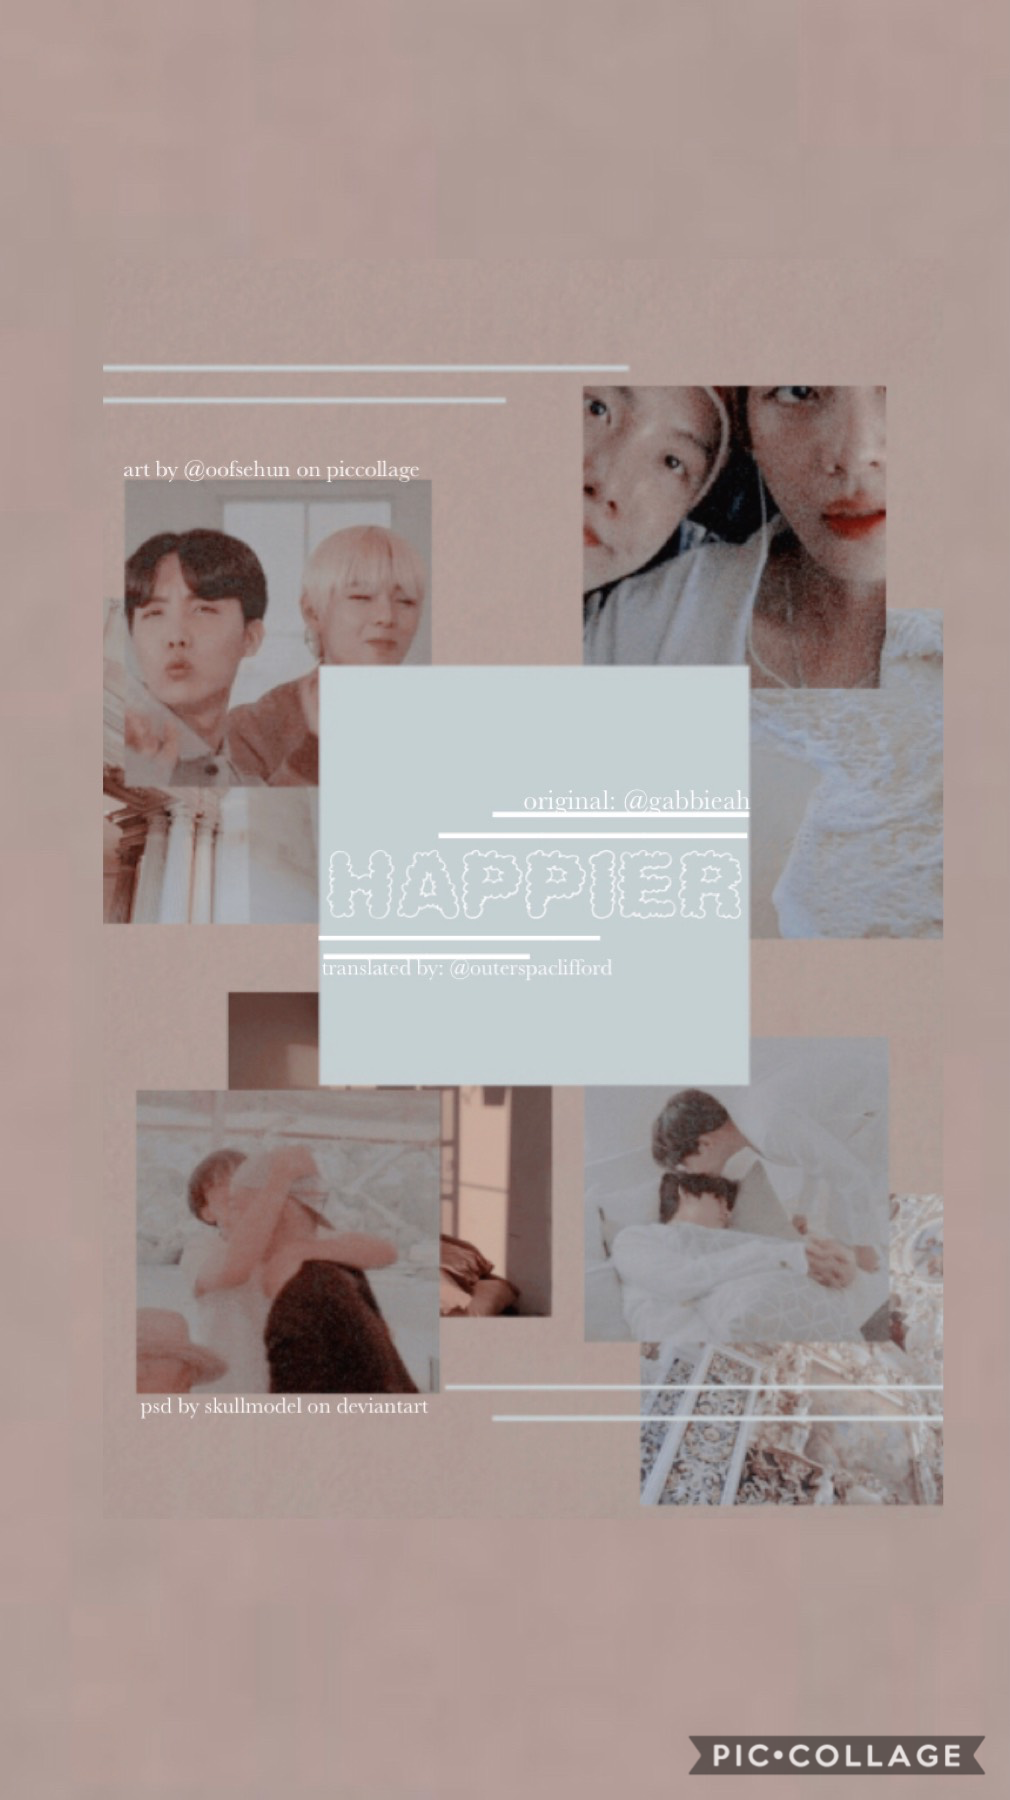 ☁️ｈａｐｐｉｅｒ (tap)

requested by my friend (irl) for her ff “happier”
pls read it (well idk if it’s in english bc she doesn’t write anything she just translates ffs bc she speaks portuguese aNd english fluently)

♡

—>
i forgot to say on my last post that i 